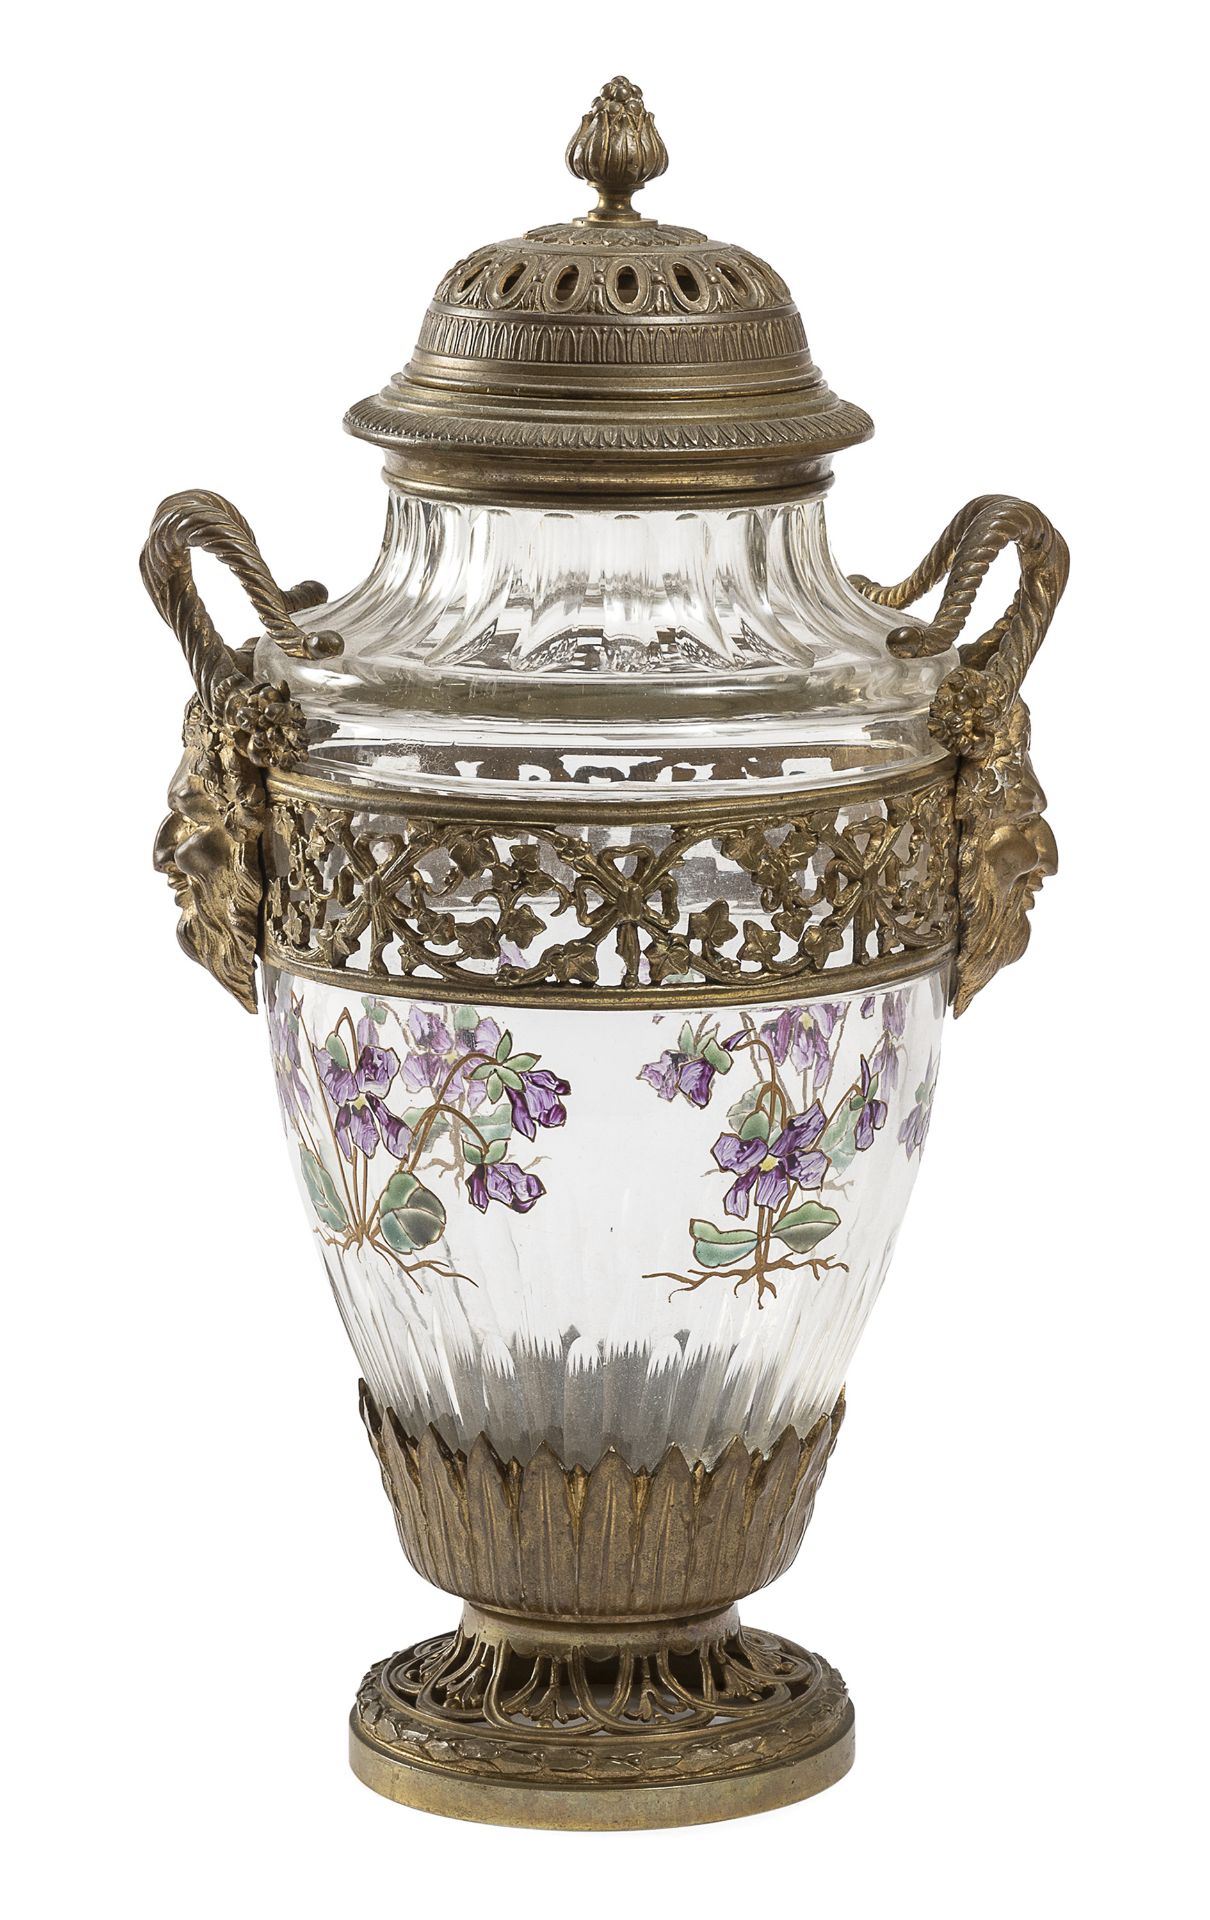 BEAUTIFUL POTICHE IN BLOWN GLASS AND GILDED METAL. 19TH CENTURY